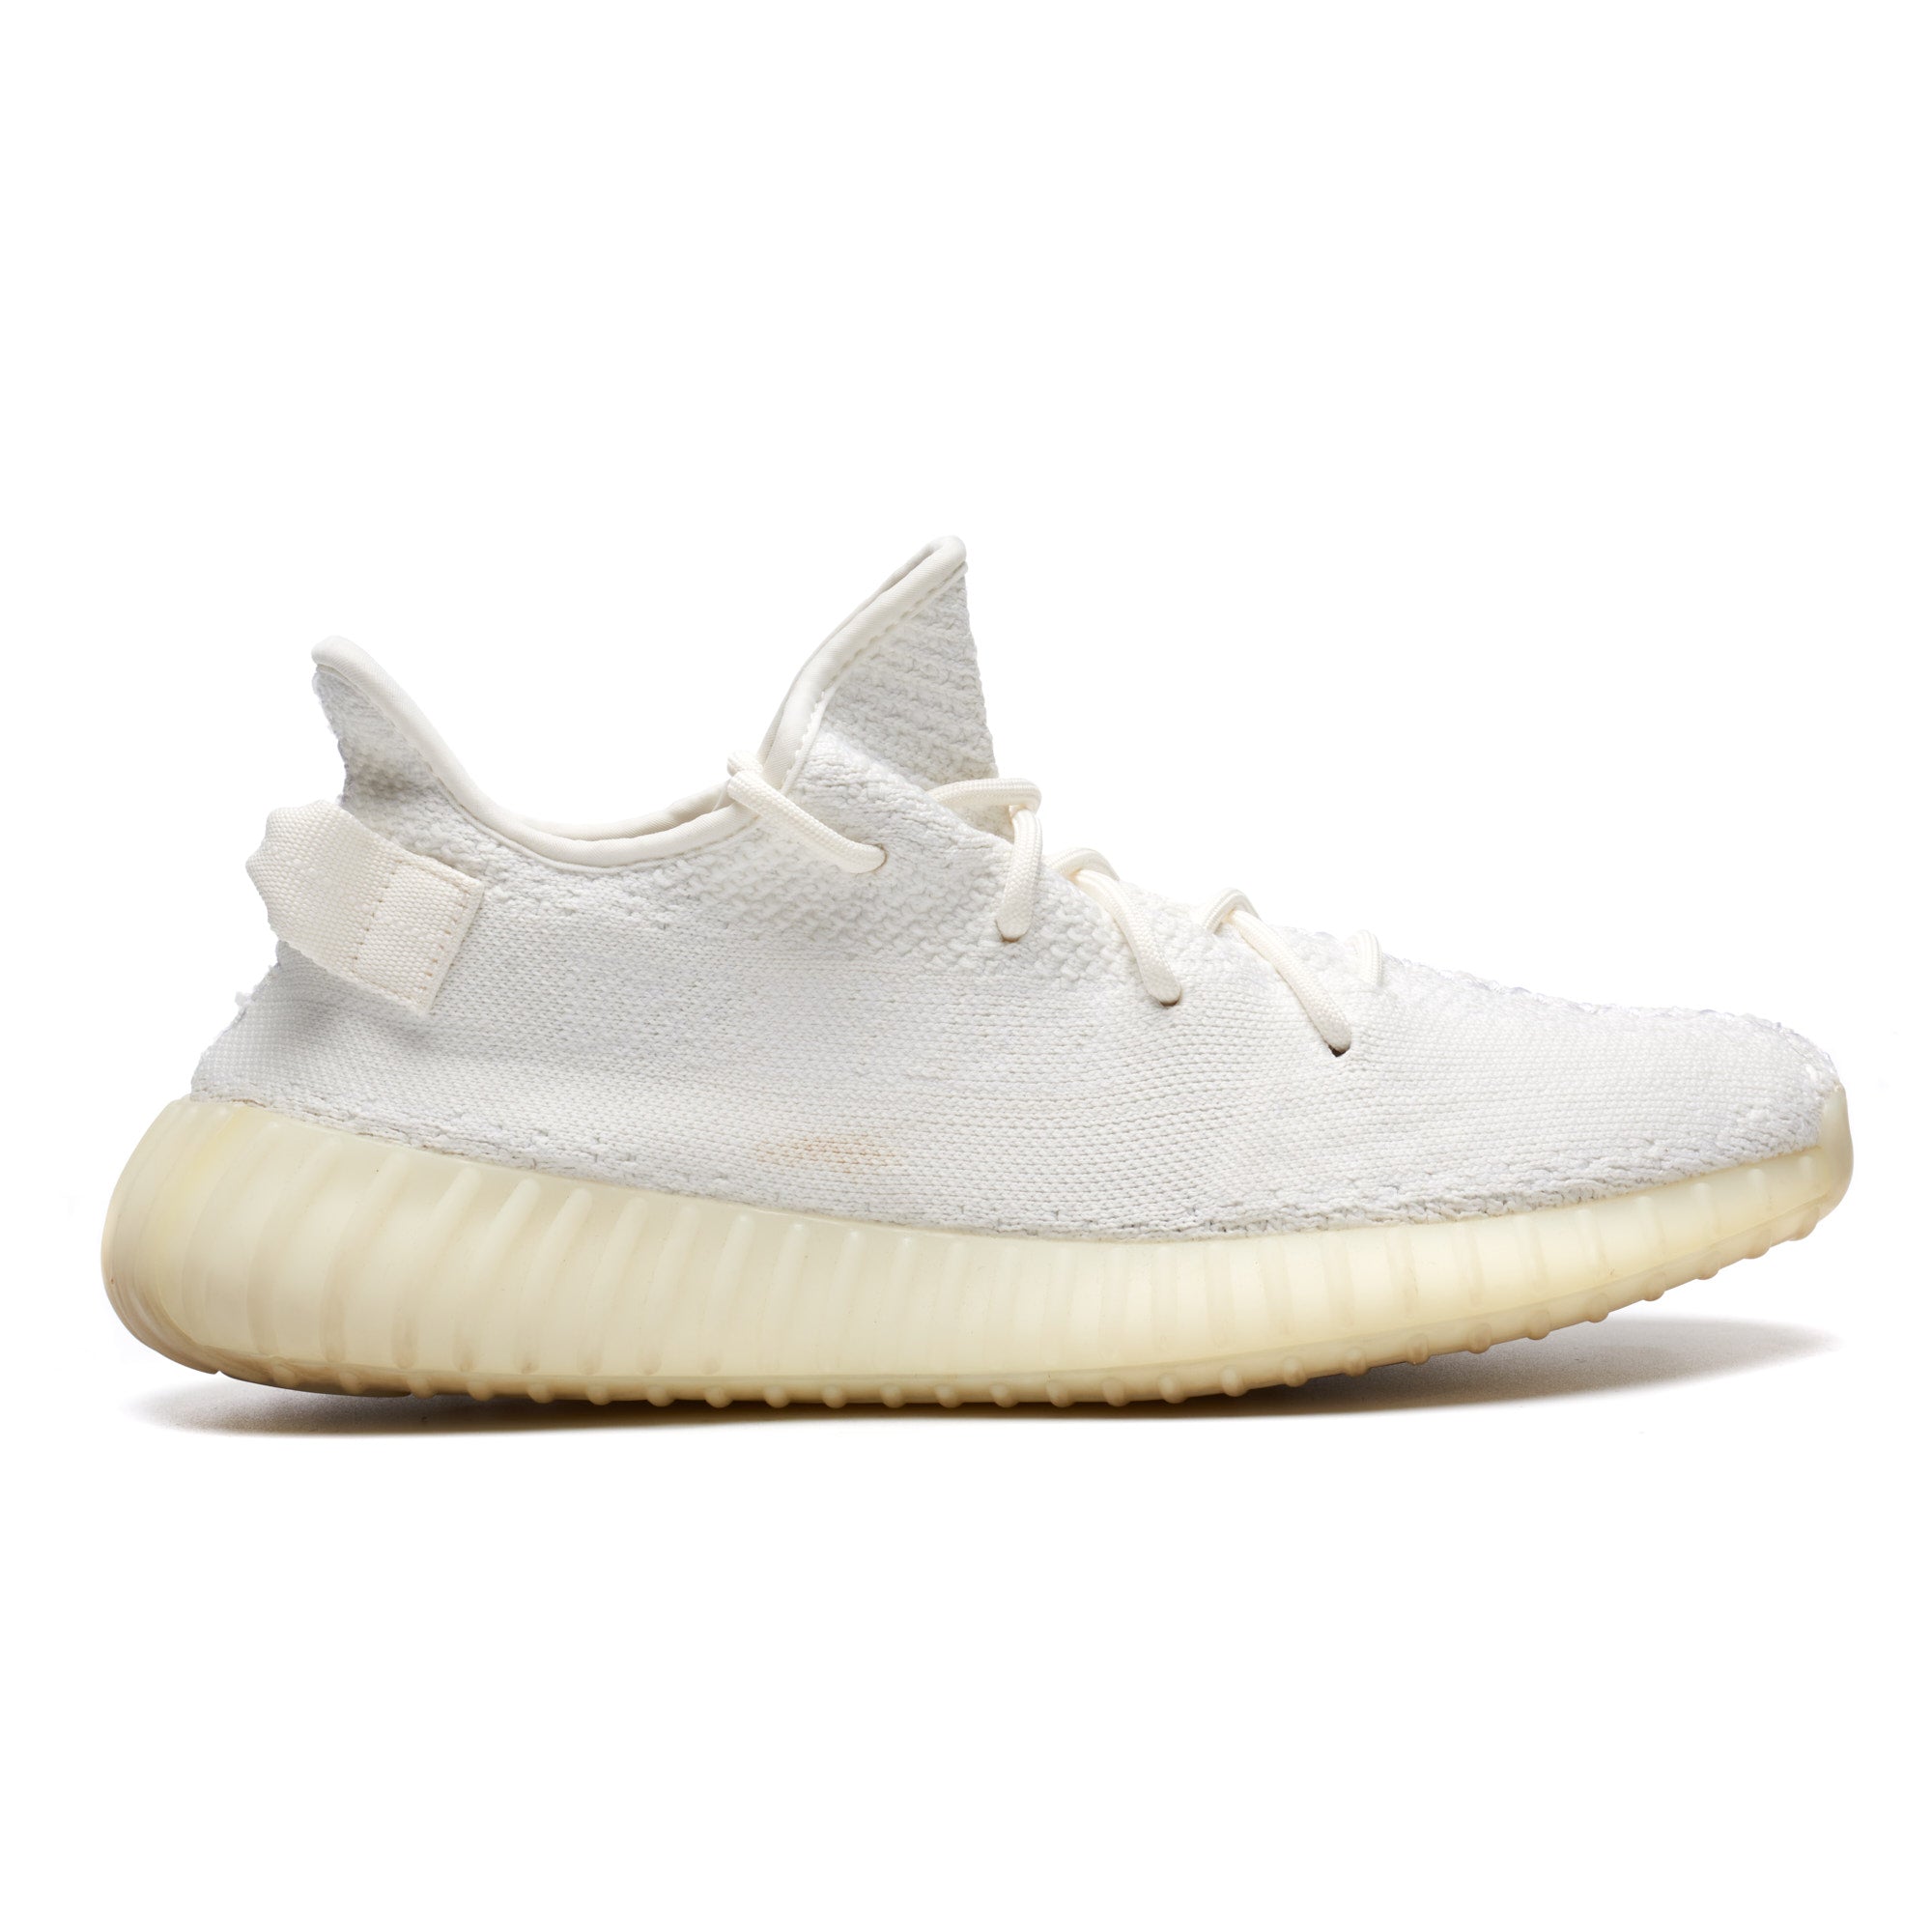 ADIDAS YEEZY BOOST 350 V2 Cream Triple White Sneakers Shoes UK 9.5